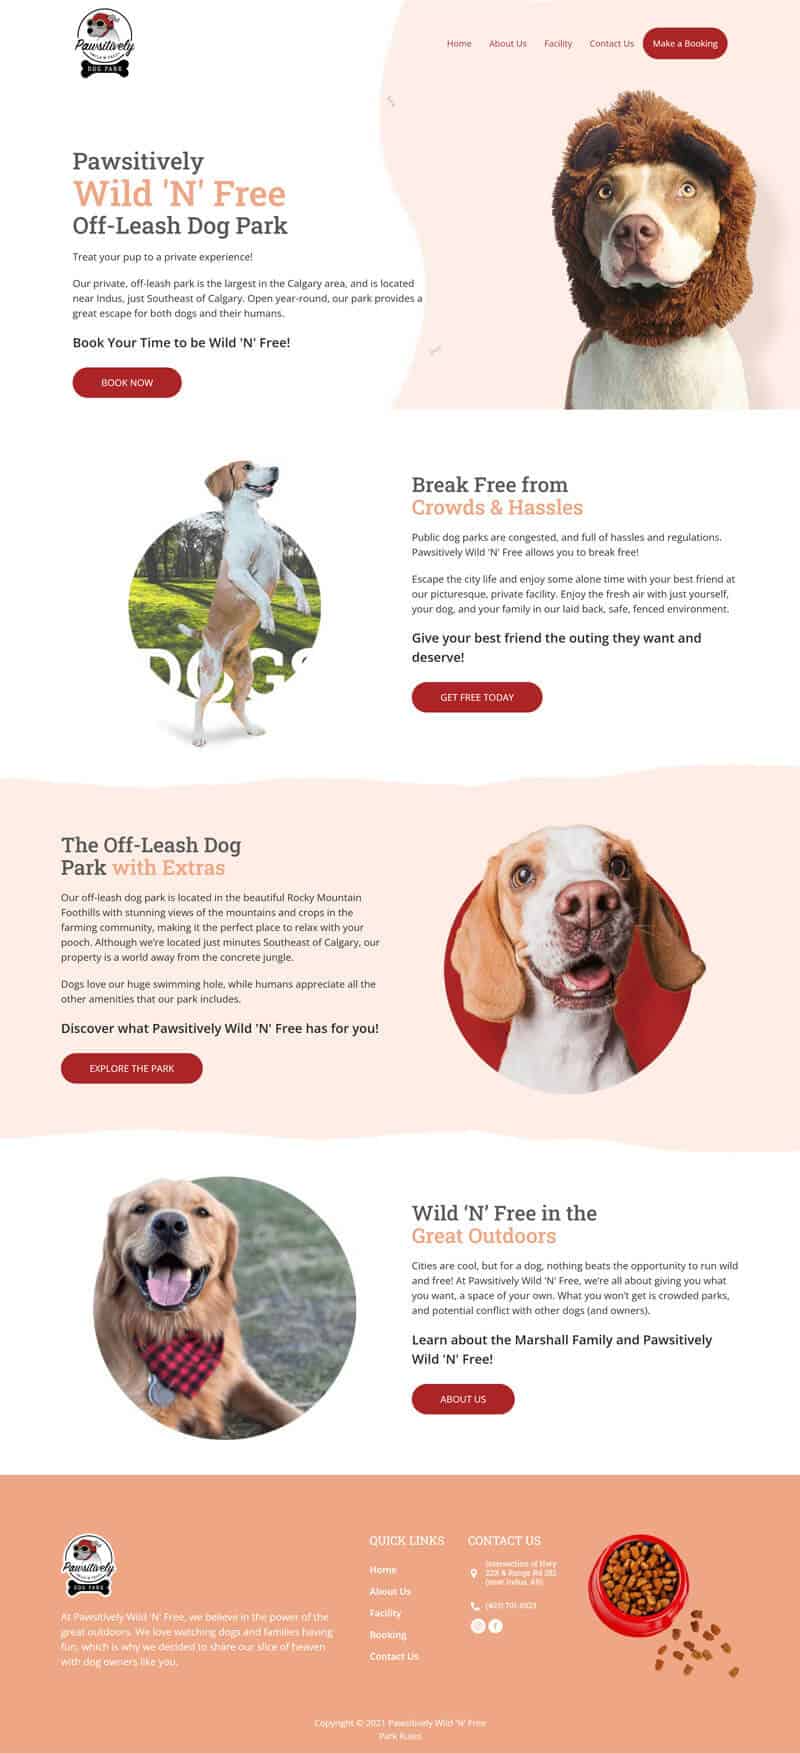 Pawsitively Wild 'N' Free - home page | designed by Peak Ed Designs